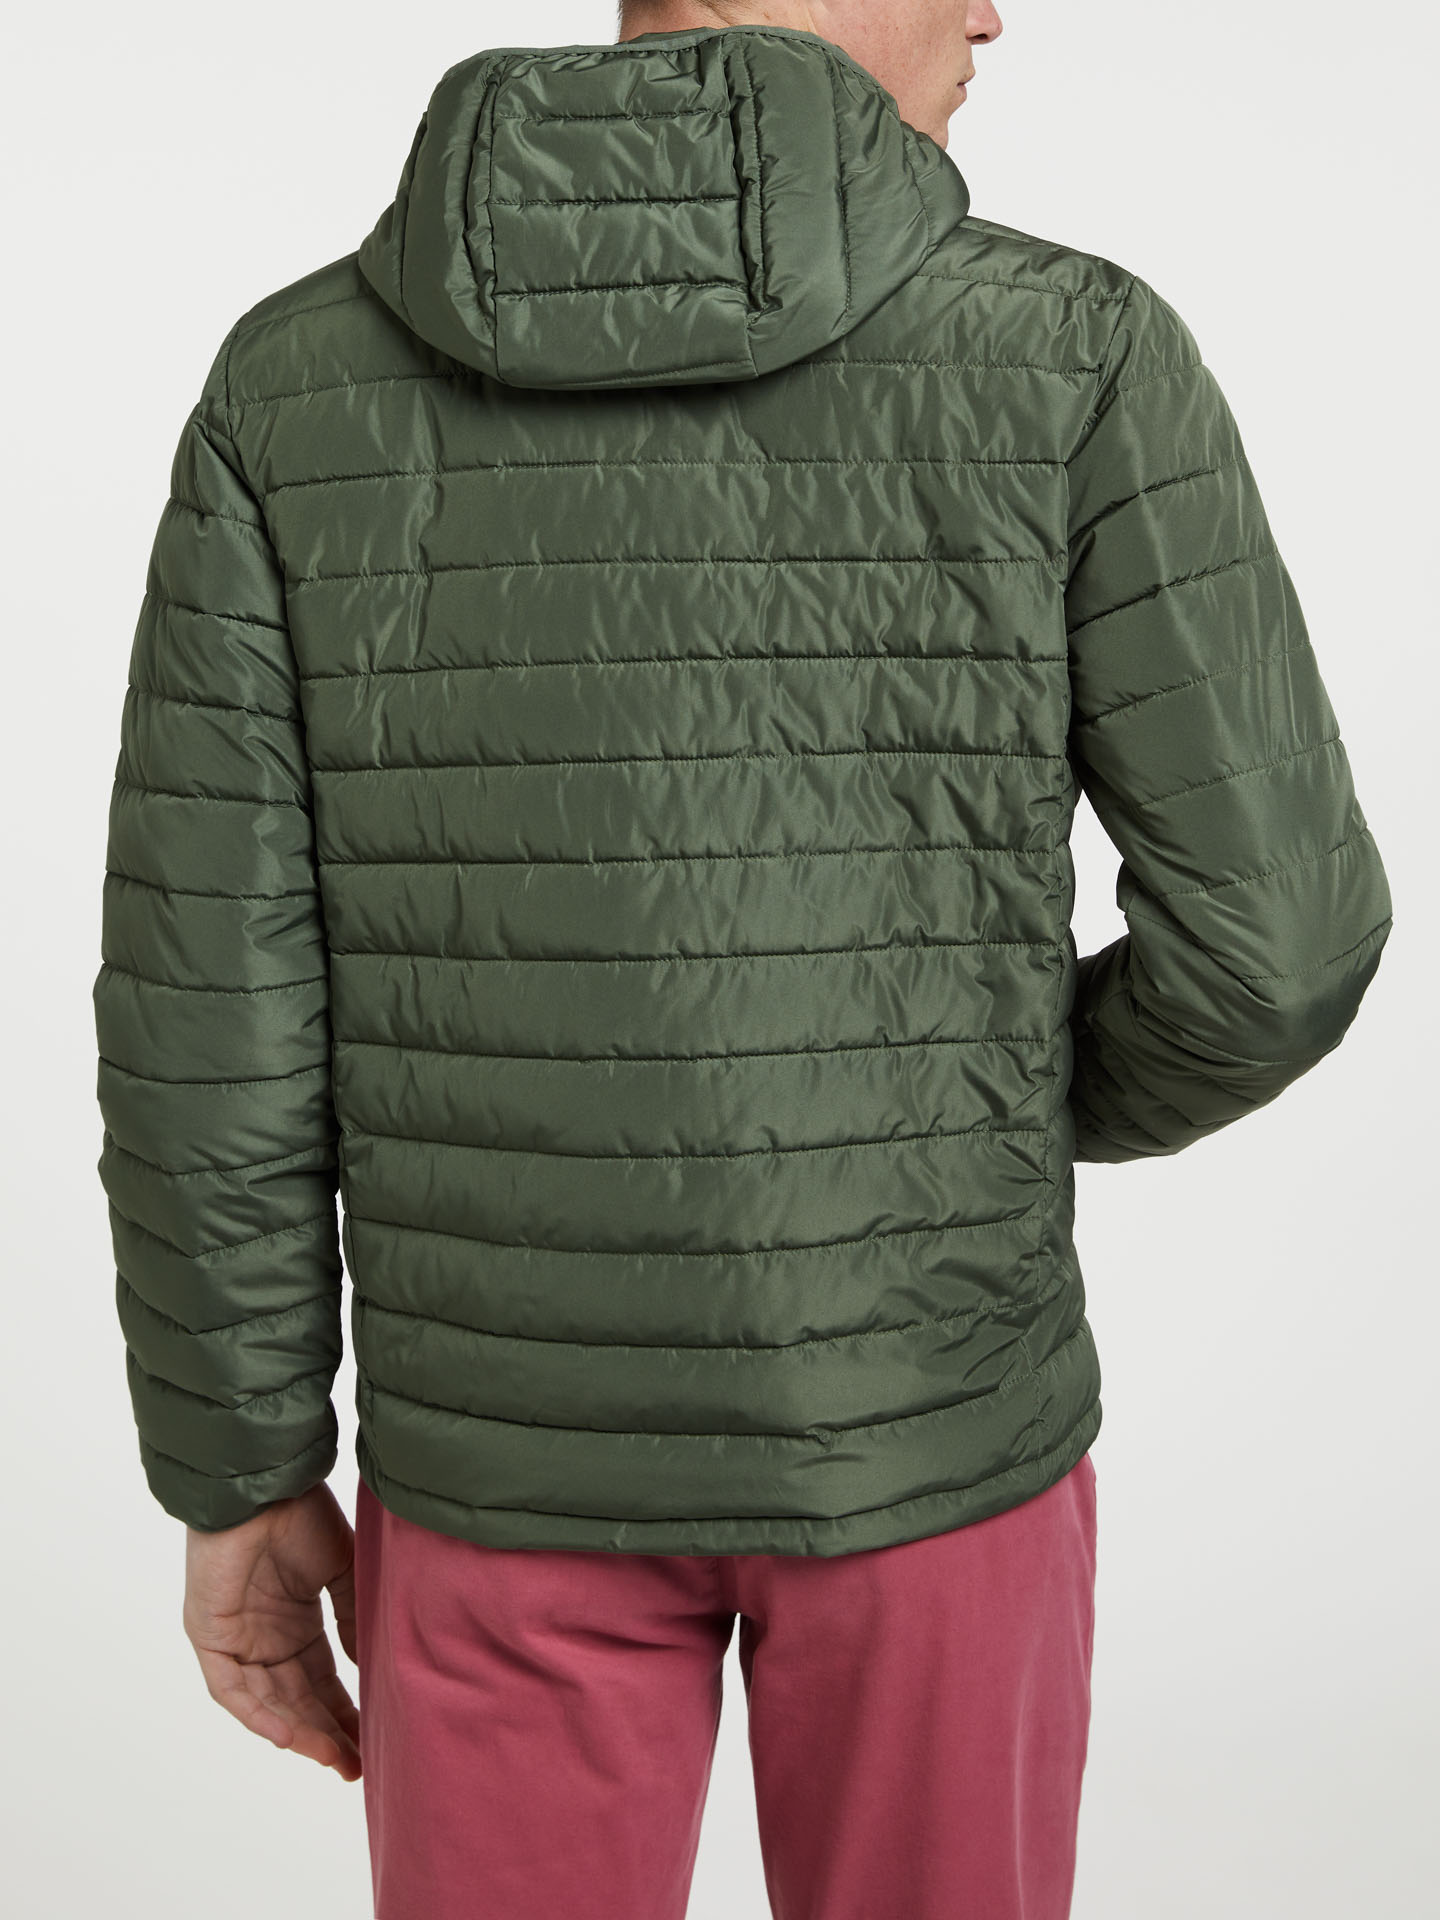 Jacket Olive Green Casual Man